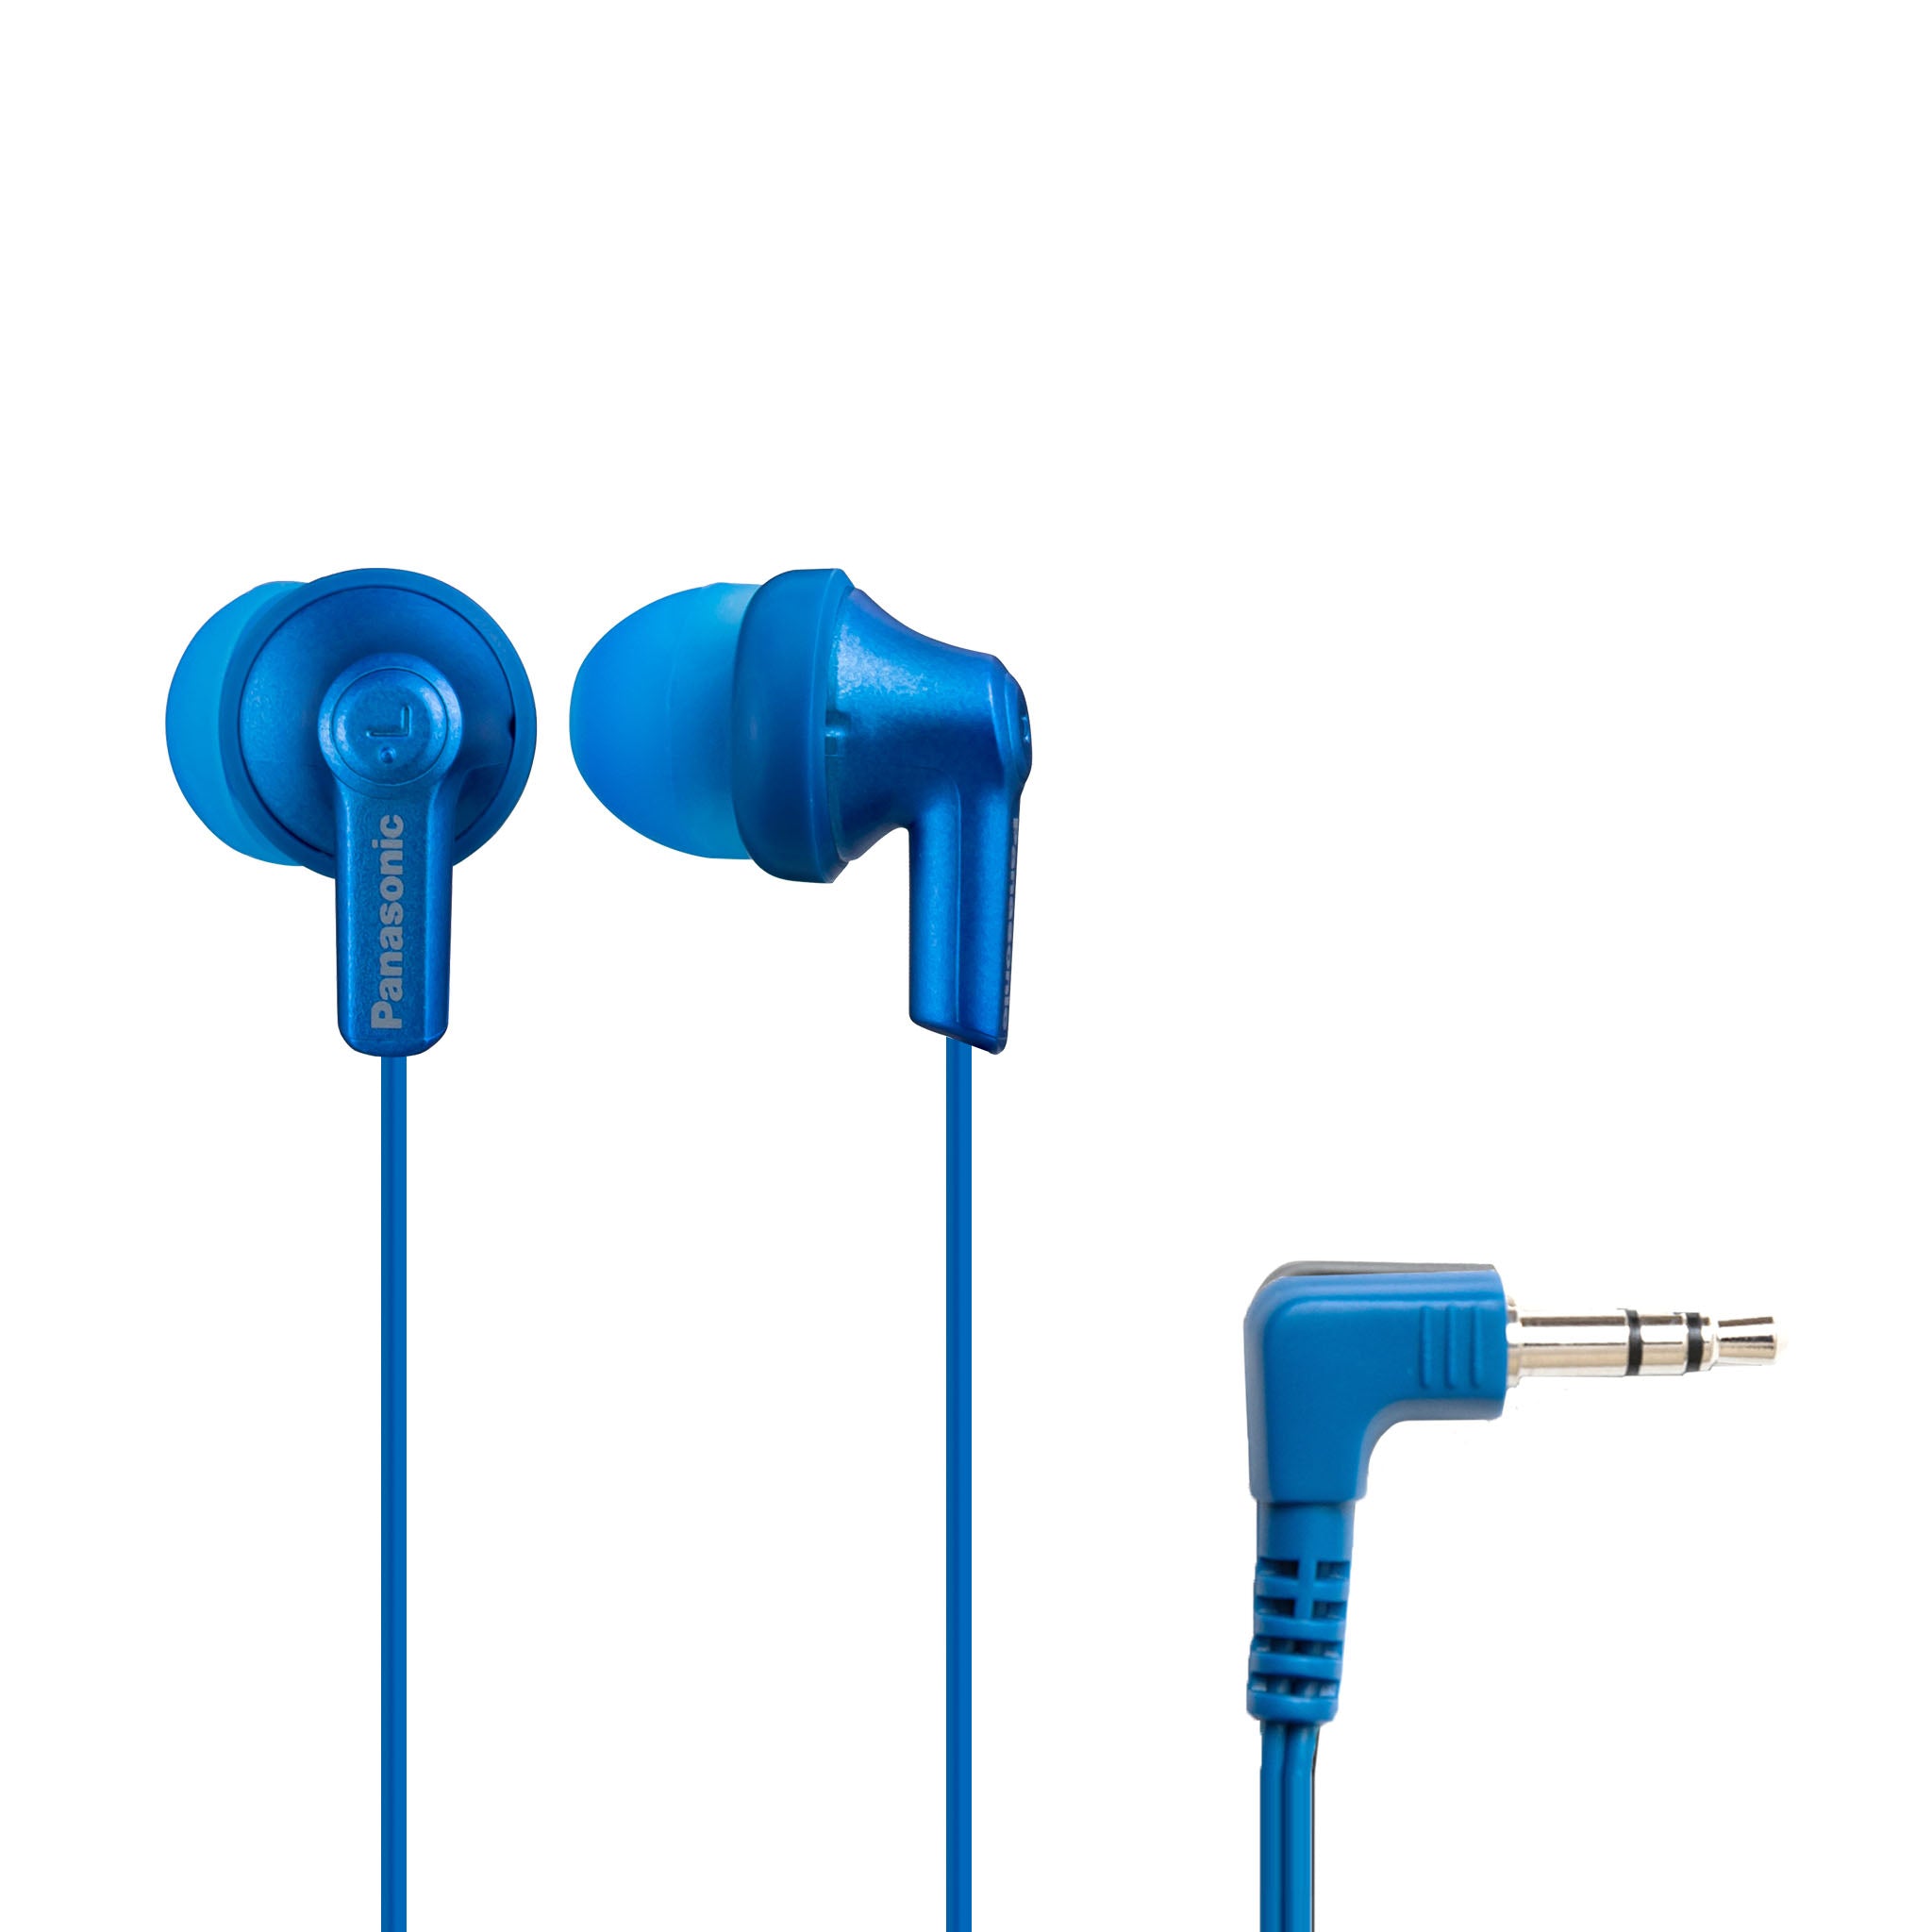 Panasonic ErgoFit In-Ear Earbud Headphones for - Phones Jack and with Laptops 3.5mm RP-HJE120